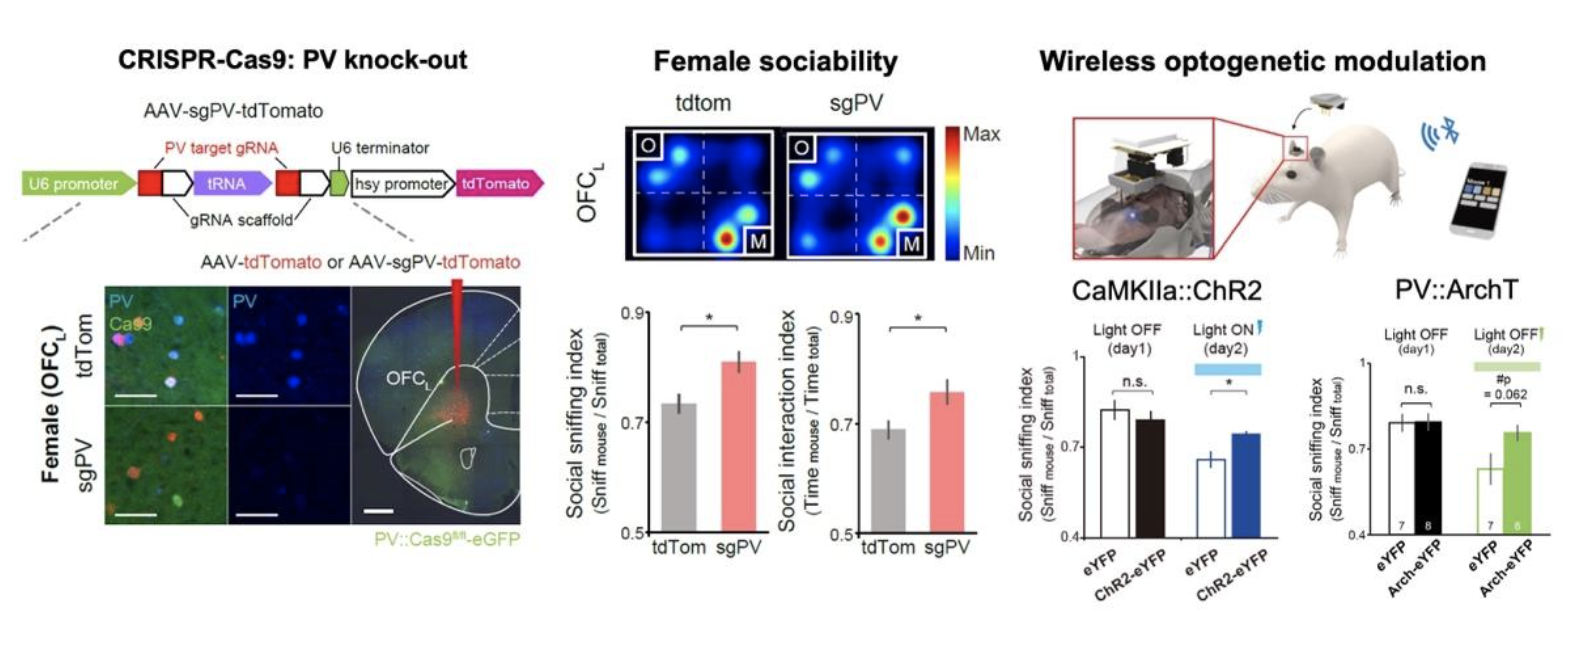 Scheme 1. Genetic knock-out of PV or optogenetic decrease of inhibition in the OFCL caused abnormal hypersociability in female mice. 